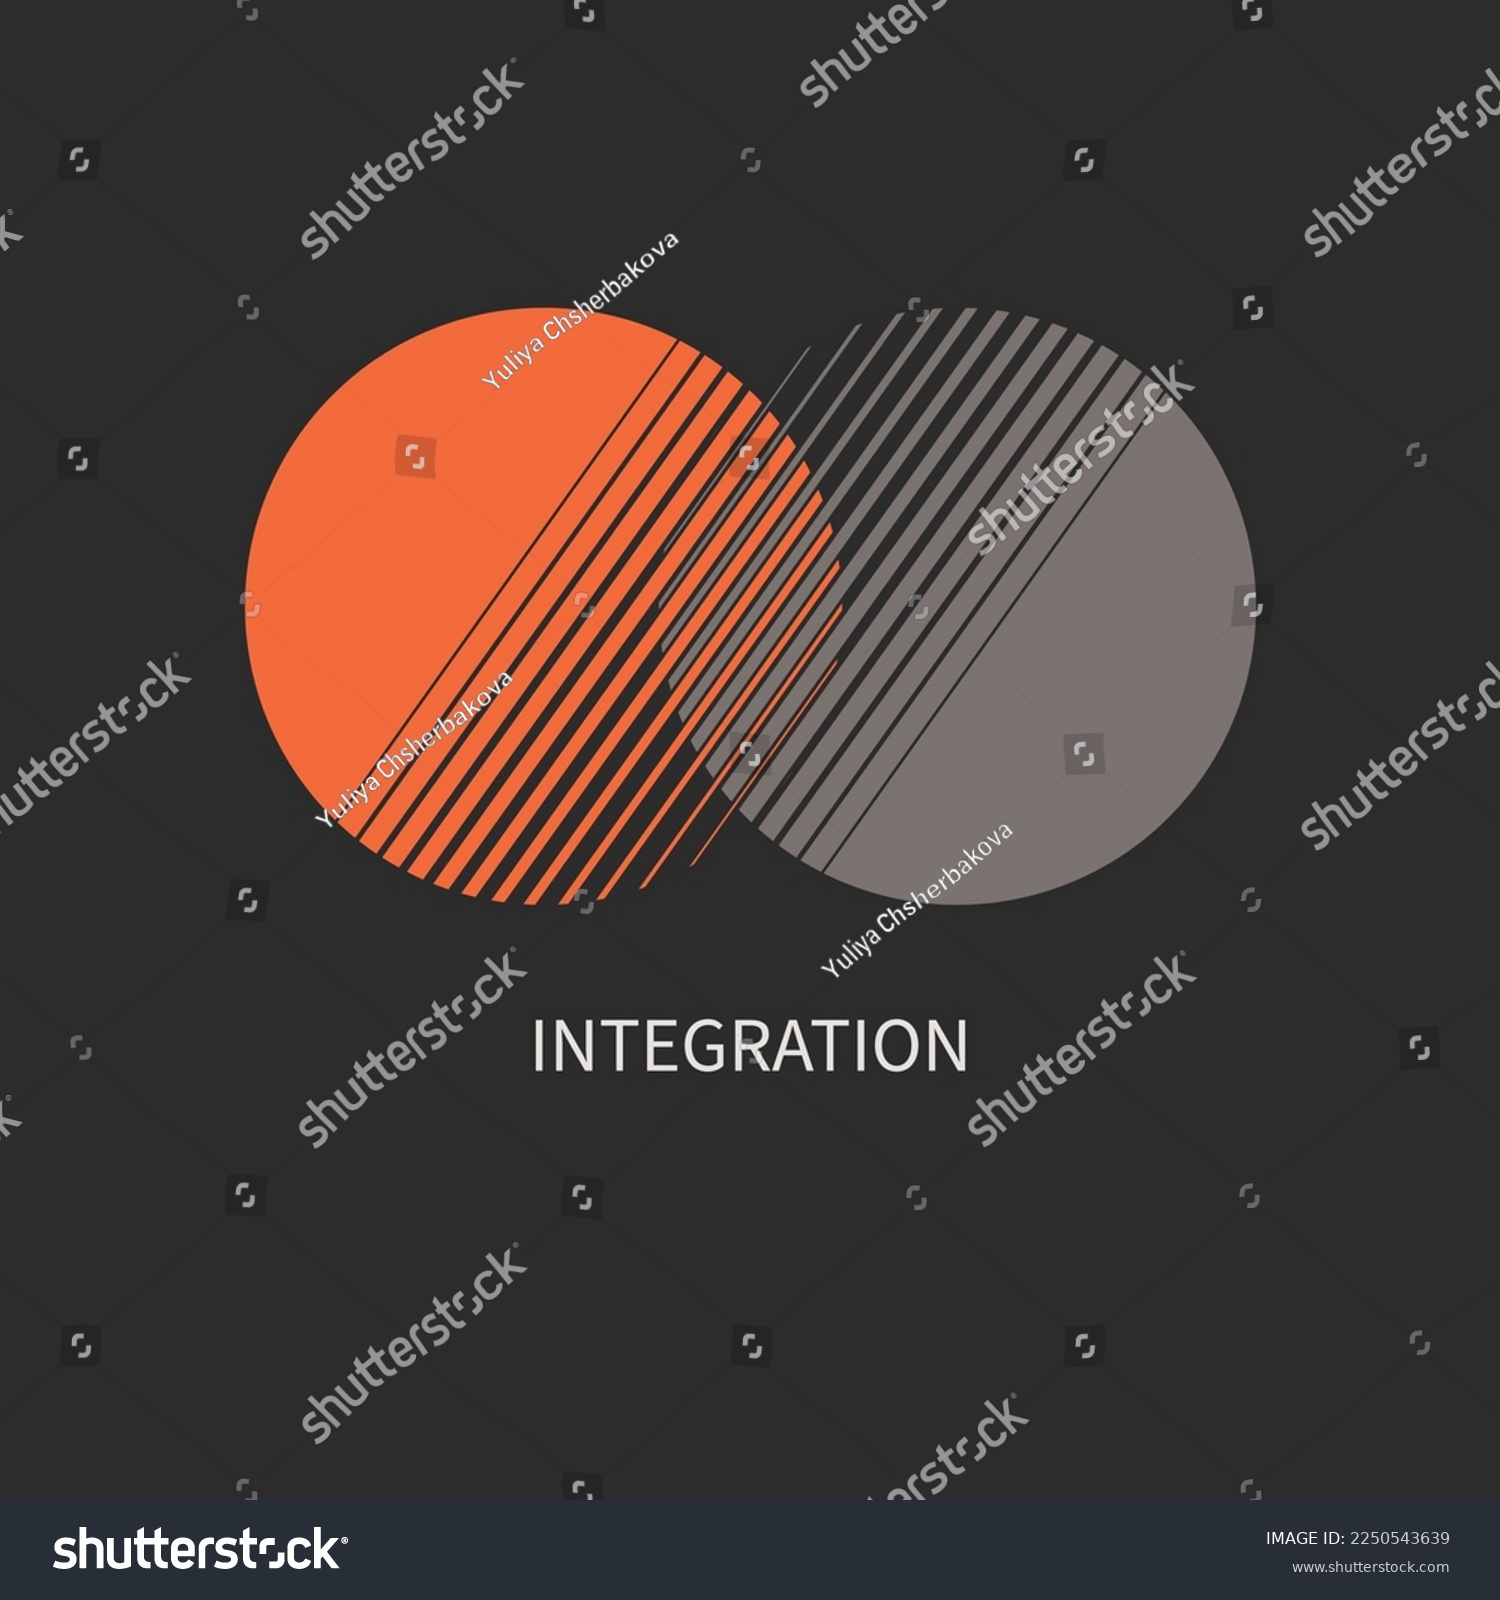 Integration, interaction sign. Round business concept. Interact logo, minimal business icon. Union flat concept #2250543639